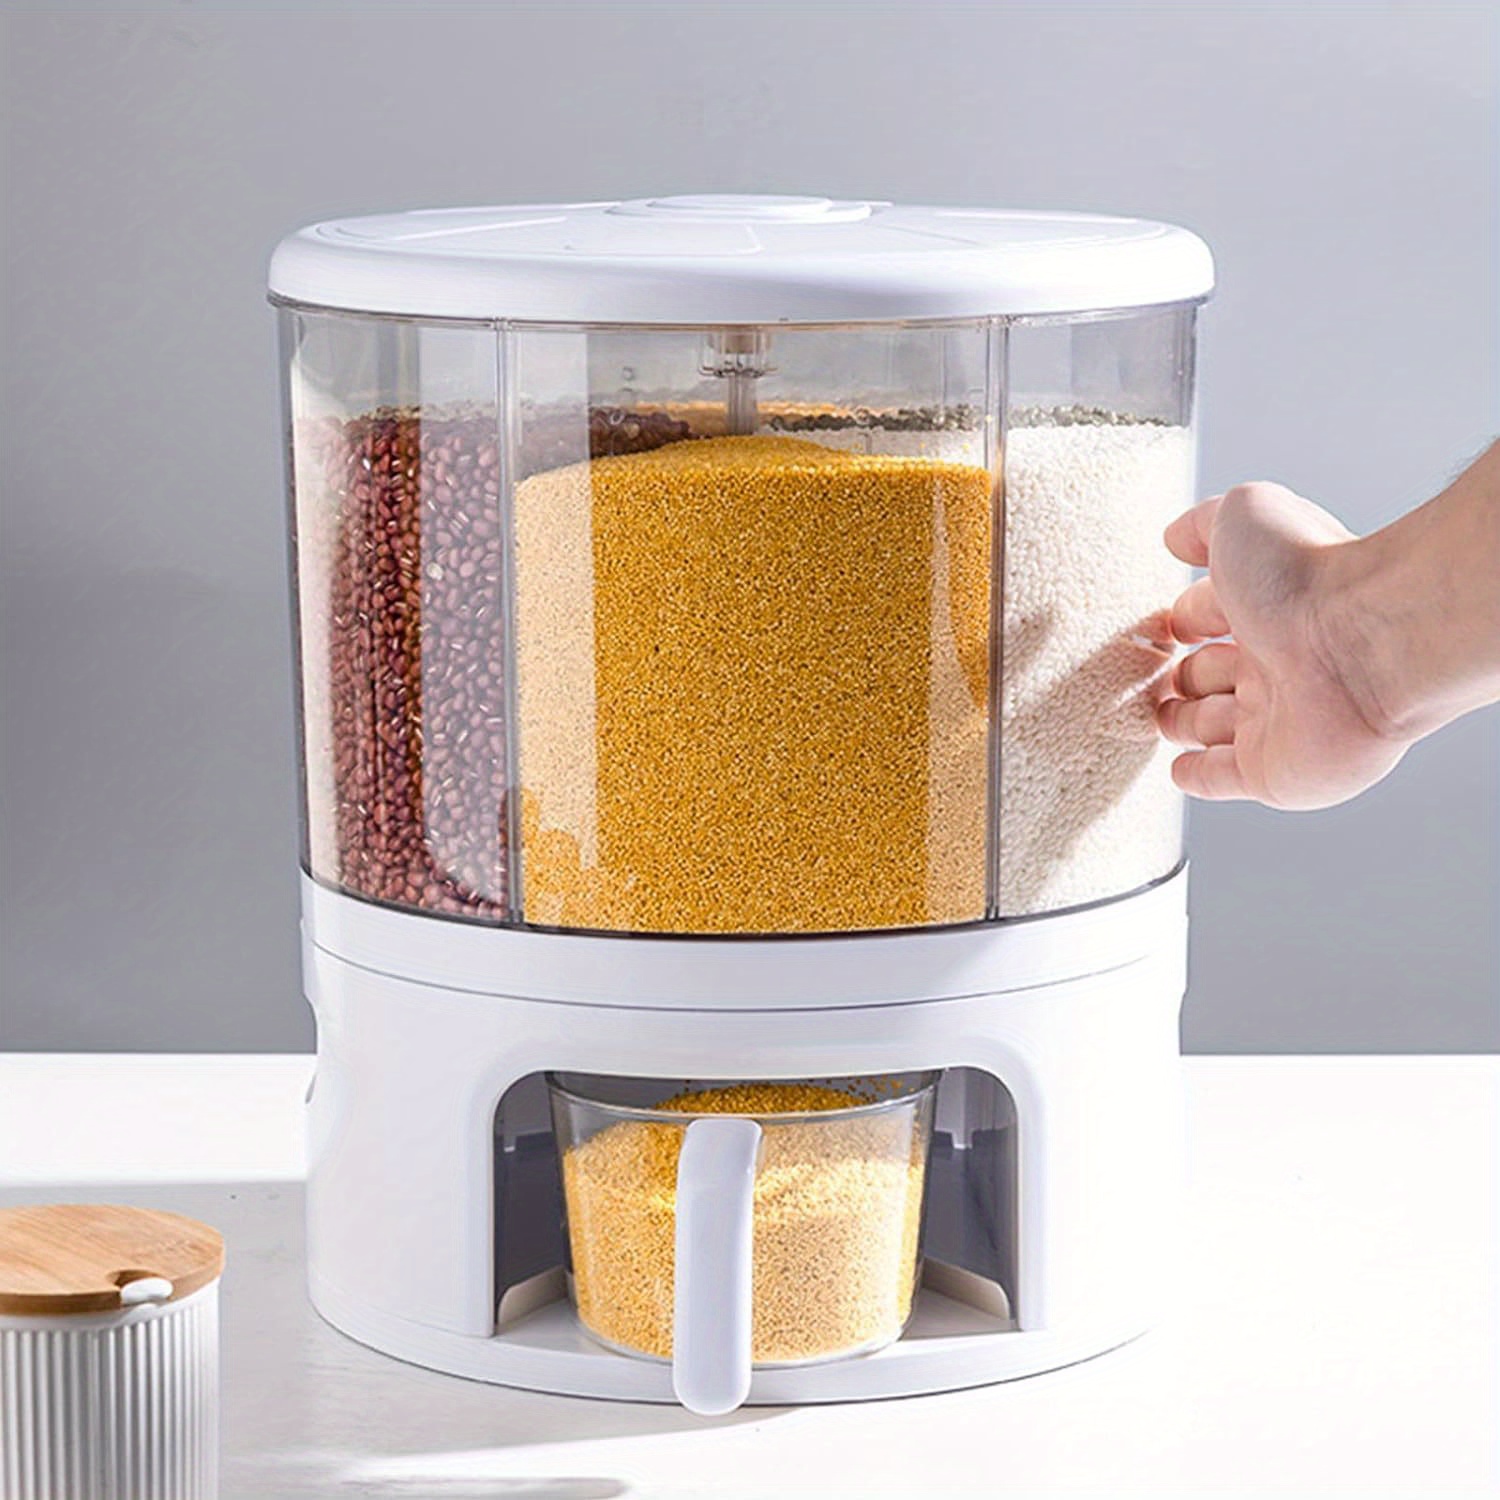 

Grain Dispenser, 360° Rotating 6 Grid Food Dispenser, 24lb Rice And Grain Storage Container, One-click Rice Output, Round Multigrain Tank Cup Grain Storage Tank For Home Kitchen